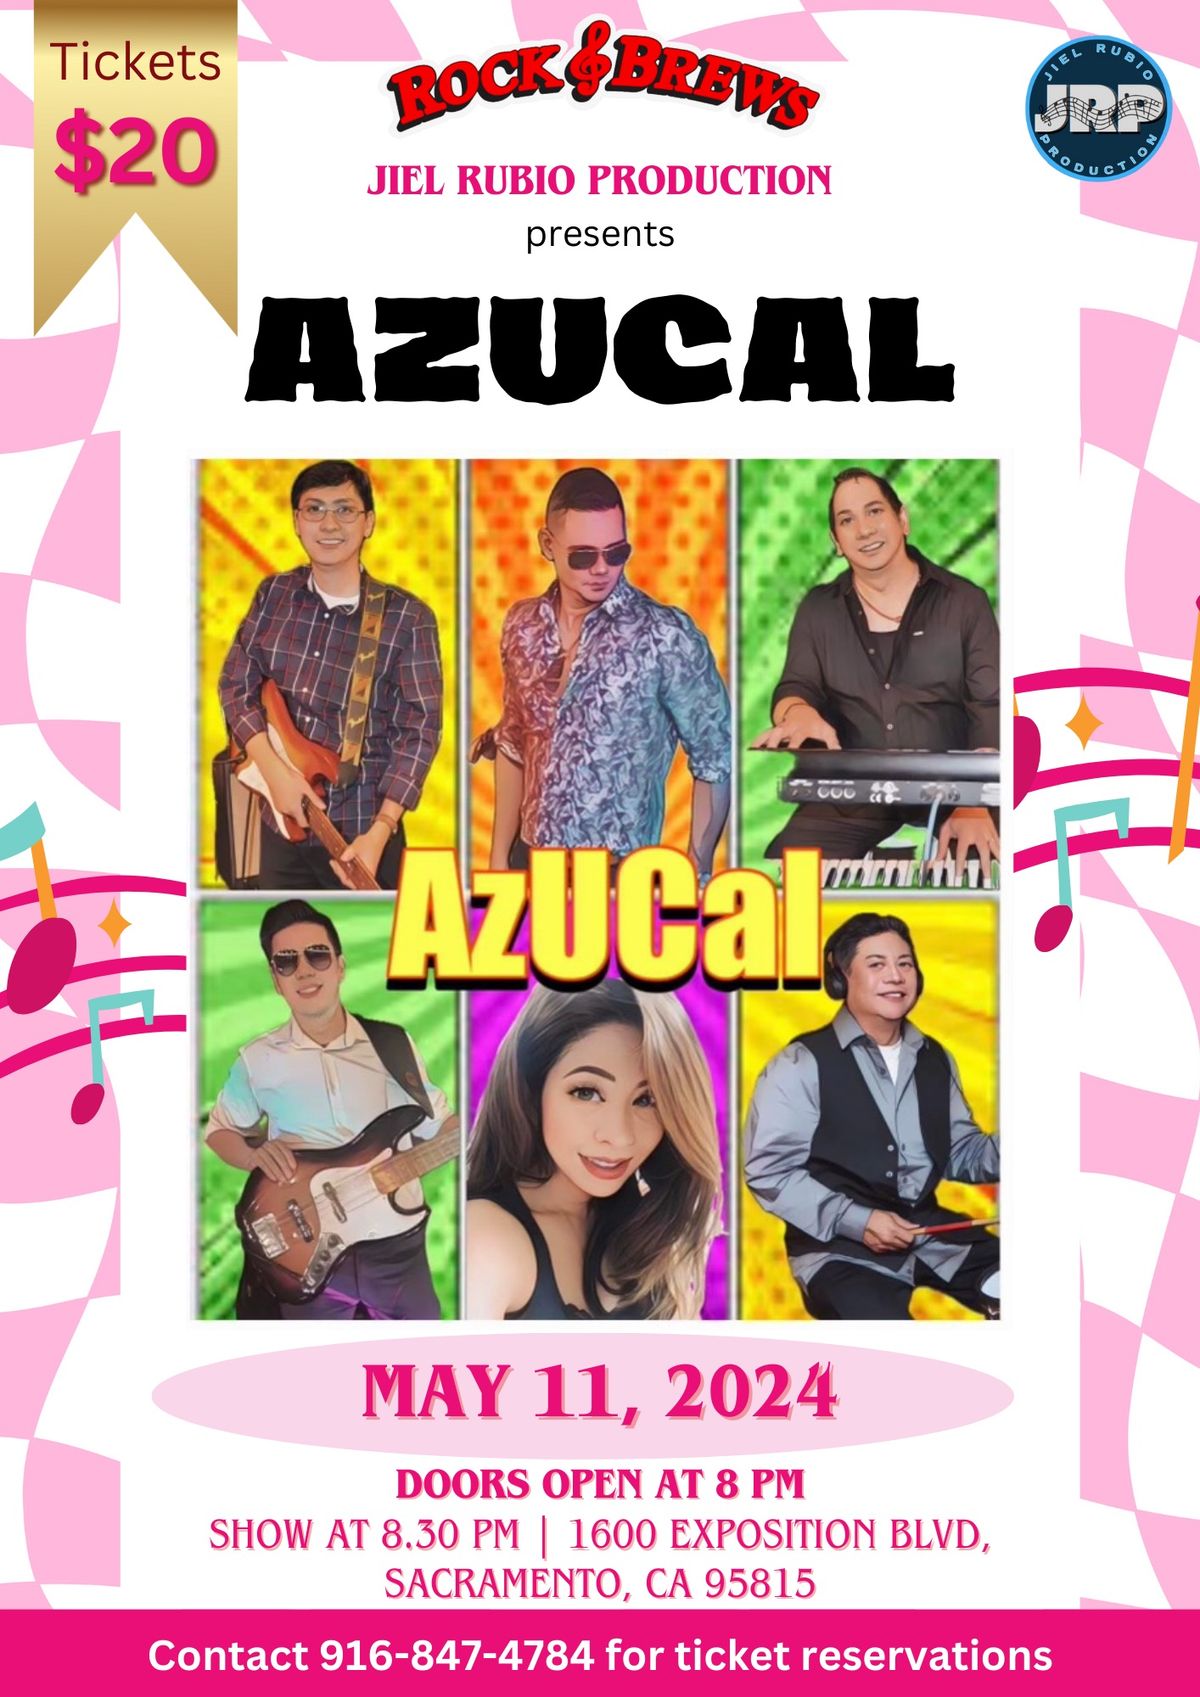 Live performance from \u201cAzUCal\u201d at Rock & Brews